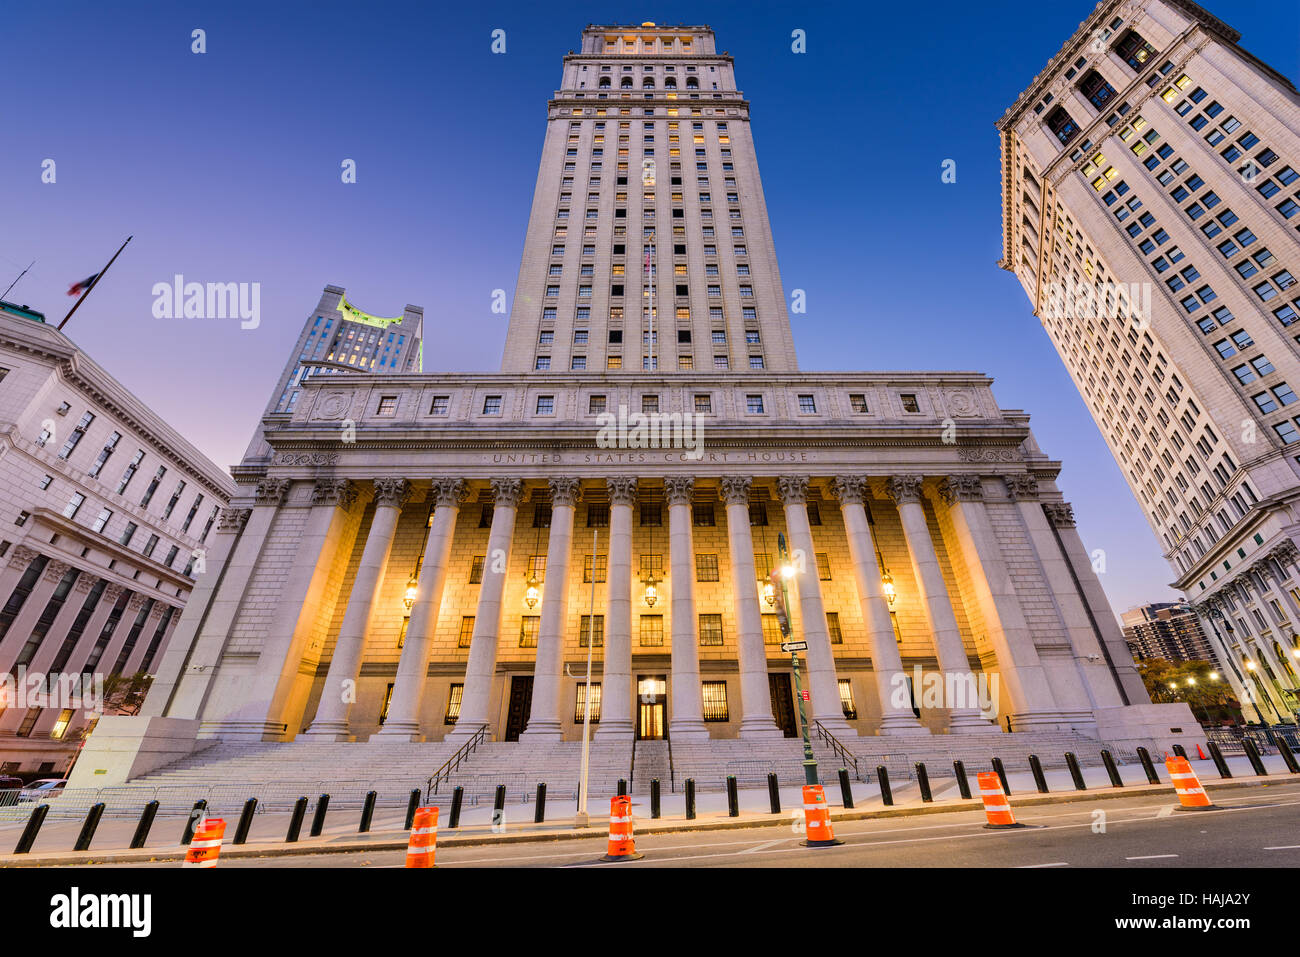 United States Court House in the Civic Center district of New York City. Stock Photo